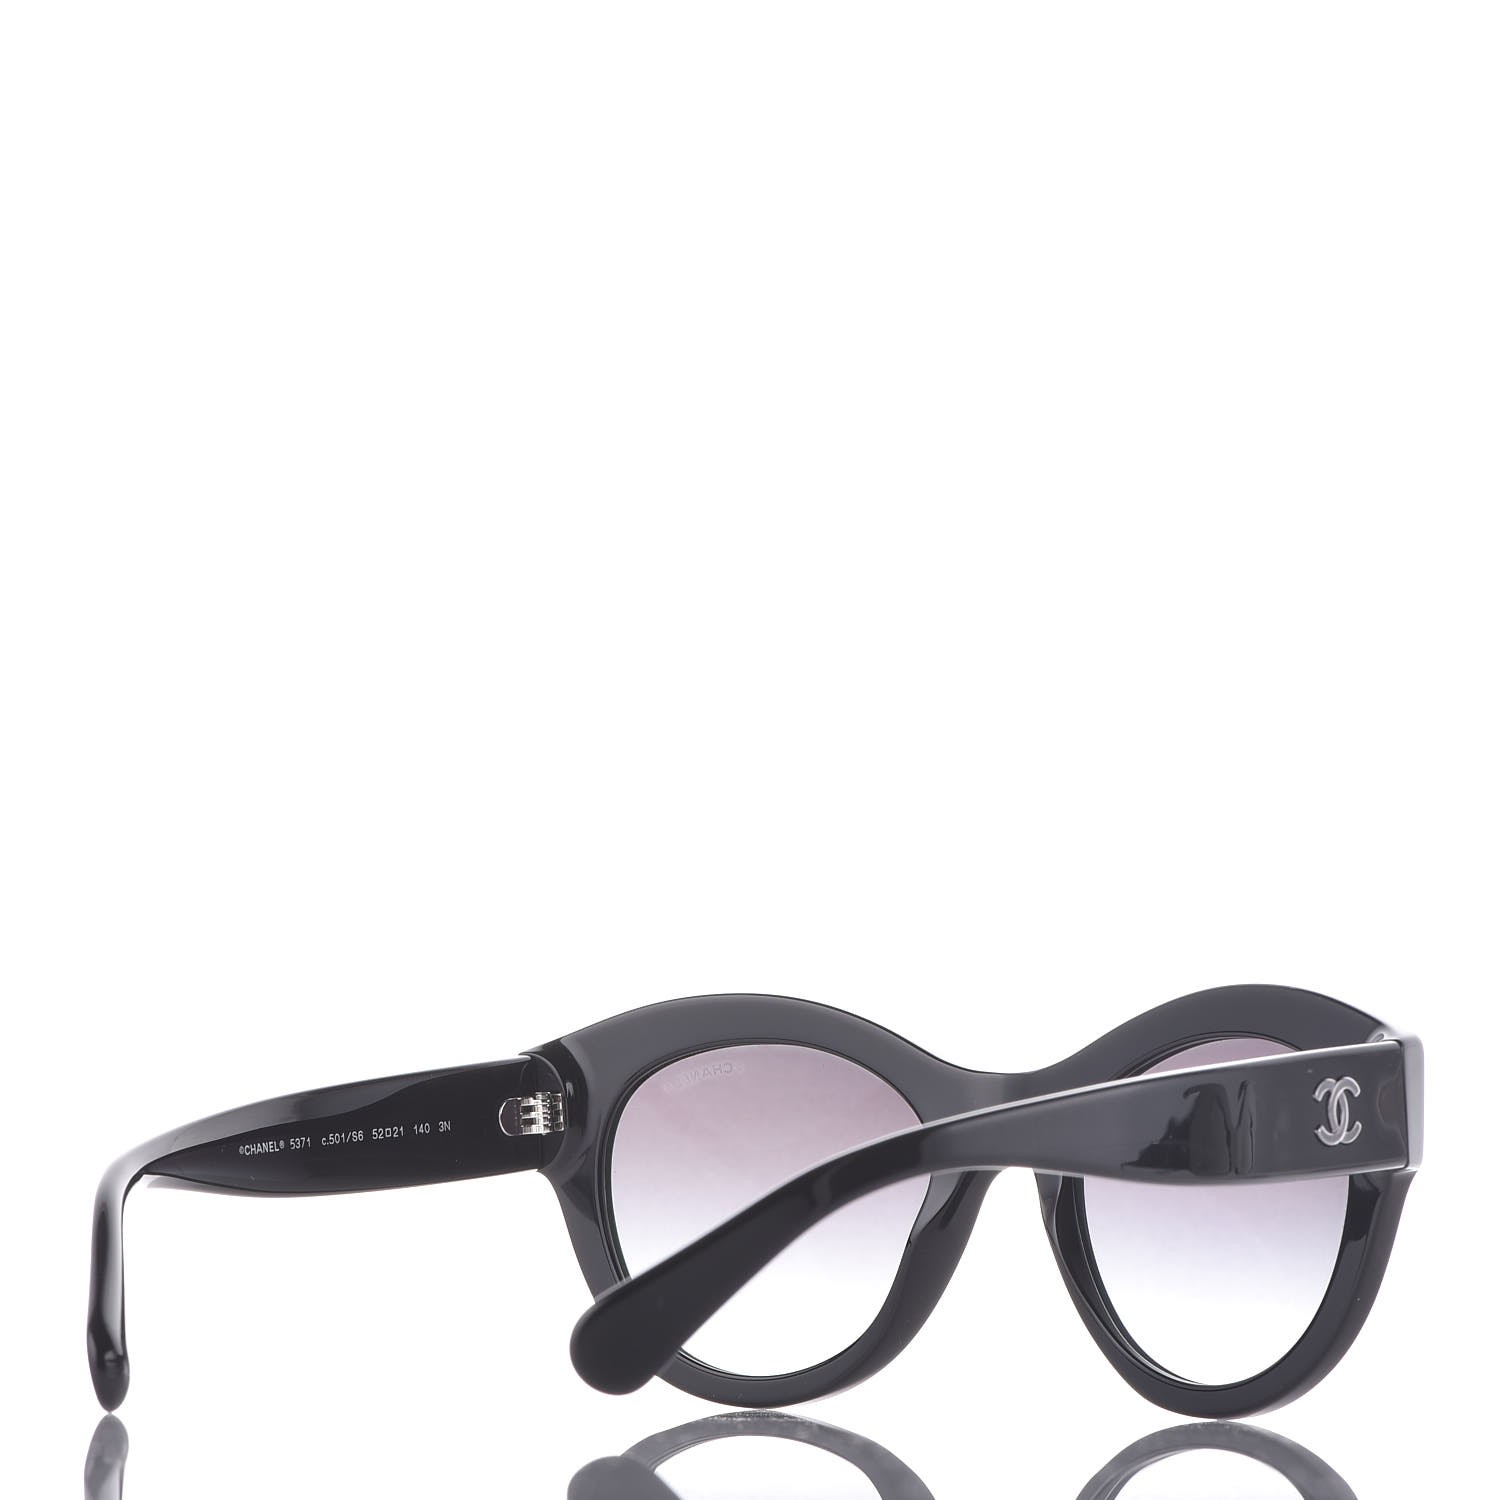 CHANEL Acetate Butterfly Sunglasses 5371 Black 343000